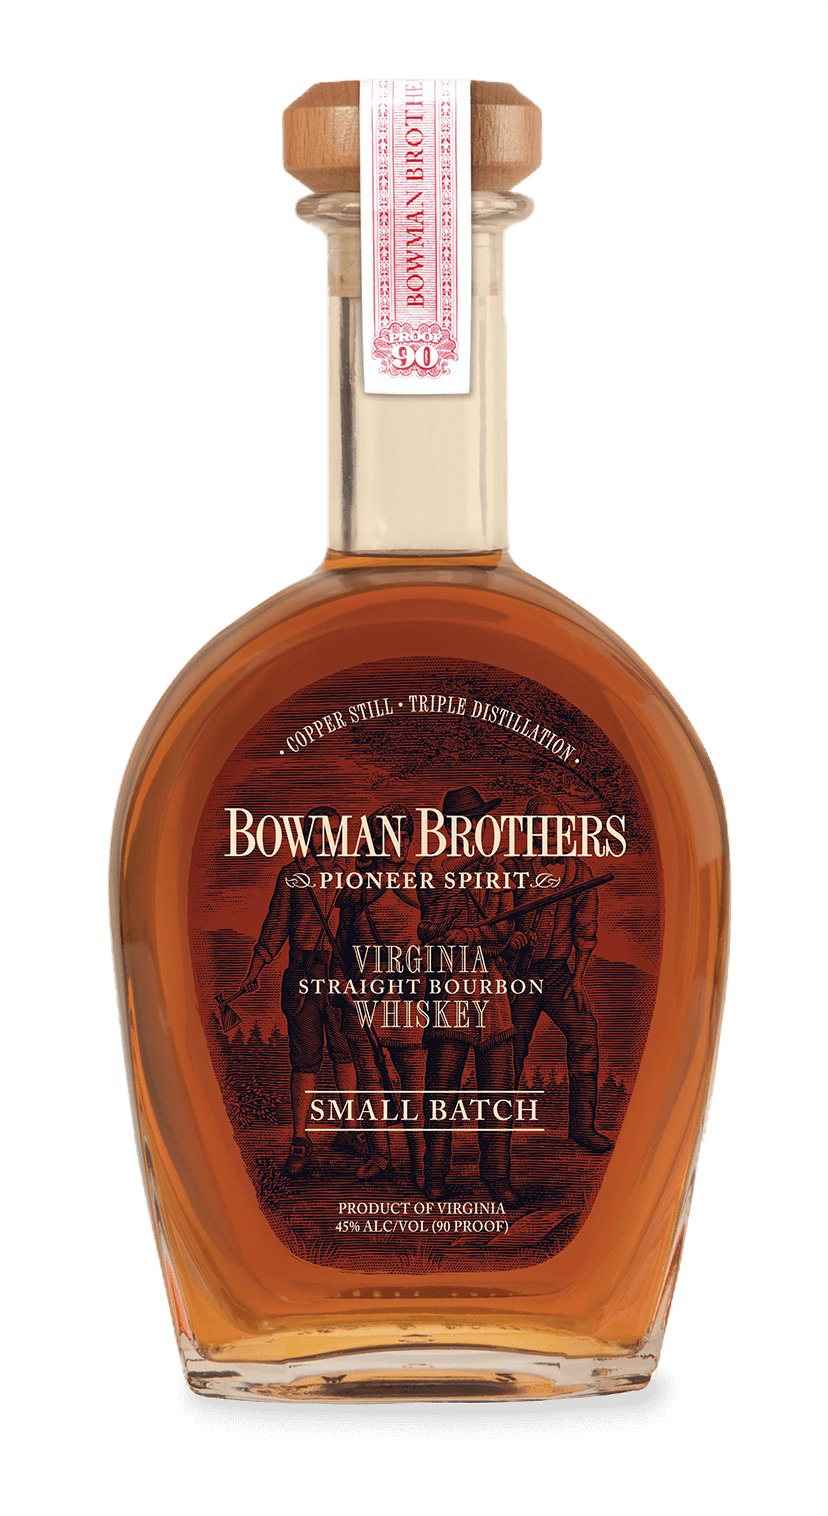 Buy Bowman Brothers Small Batch Bourbon Whiskey Online -Craft City